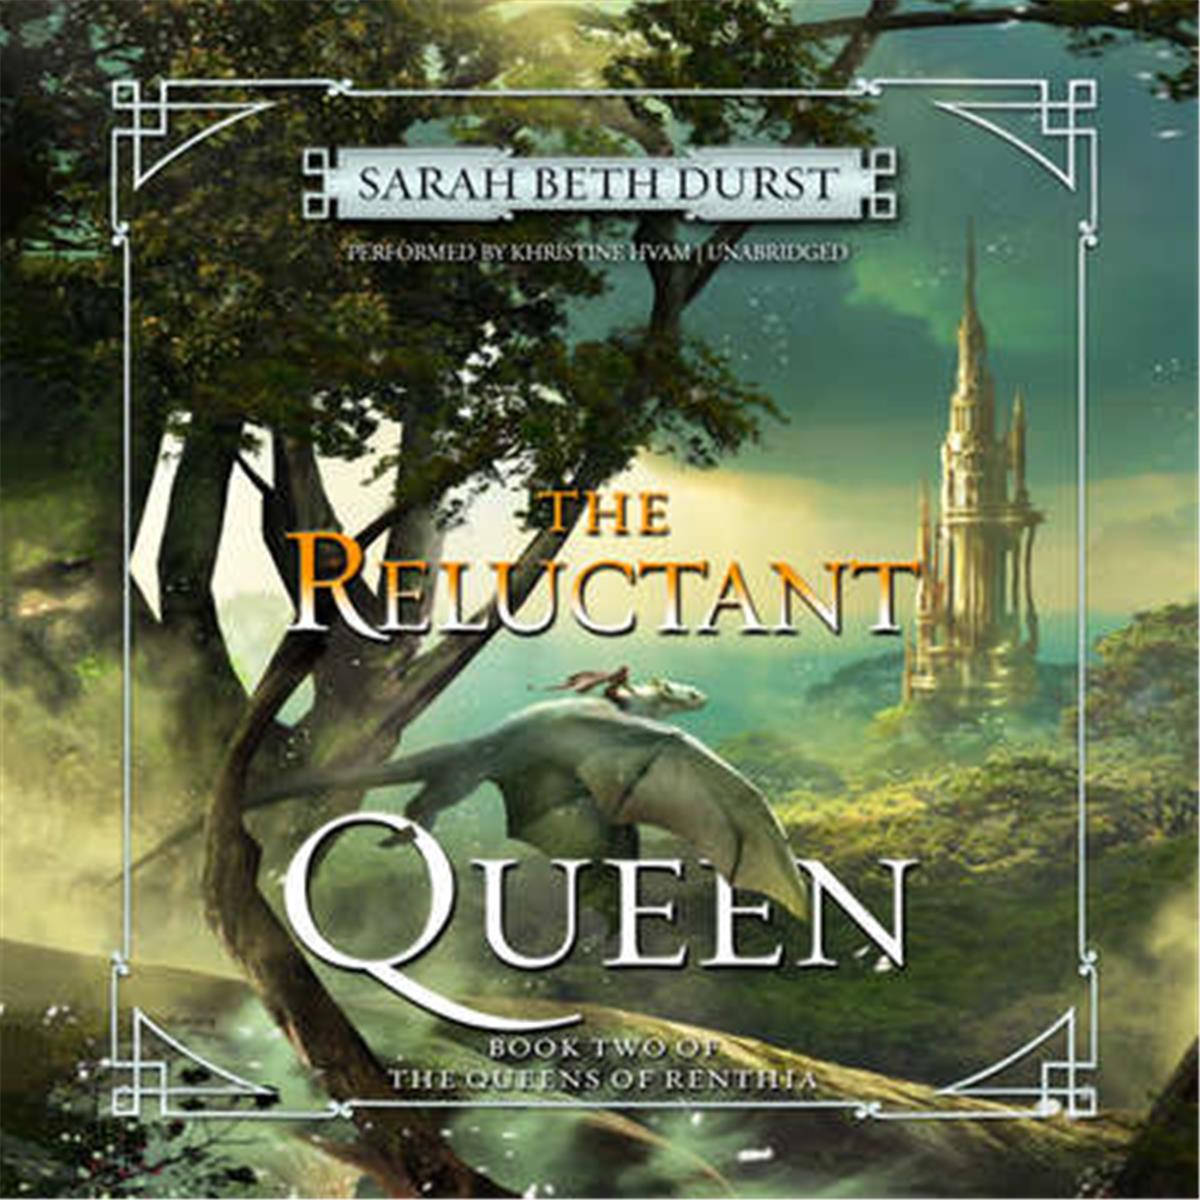 9781538419199 The Reluctant Queen - Audio Book